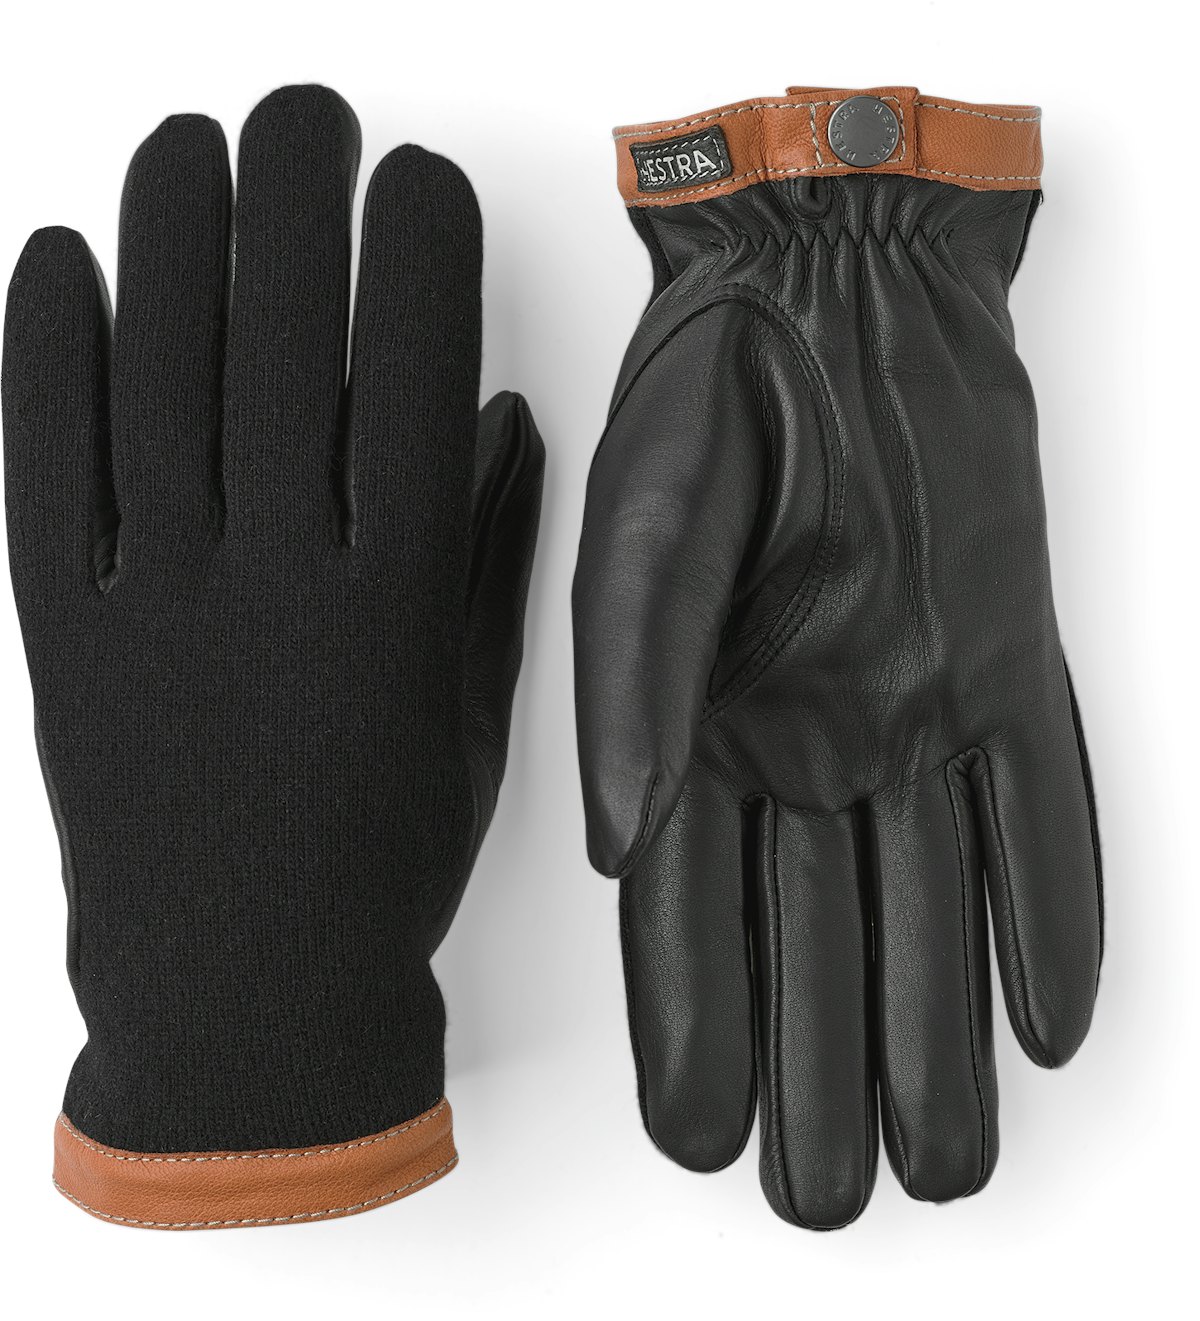 Hiems, Black Leather & Wool Gloves, In stock!